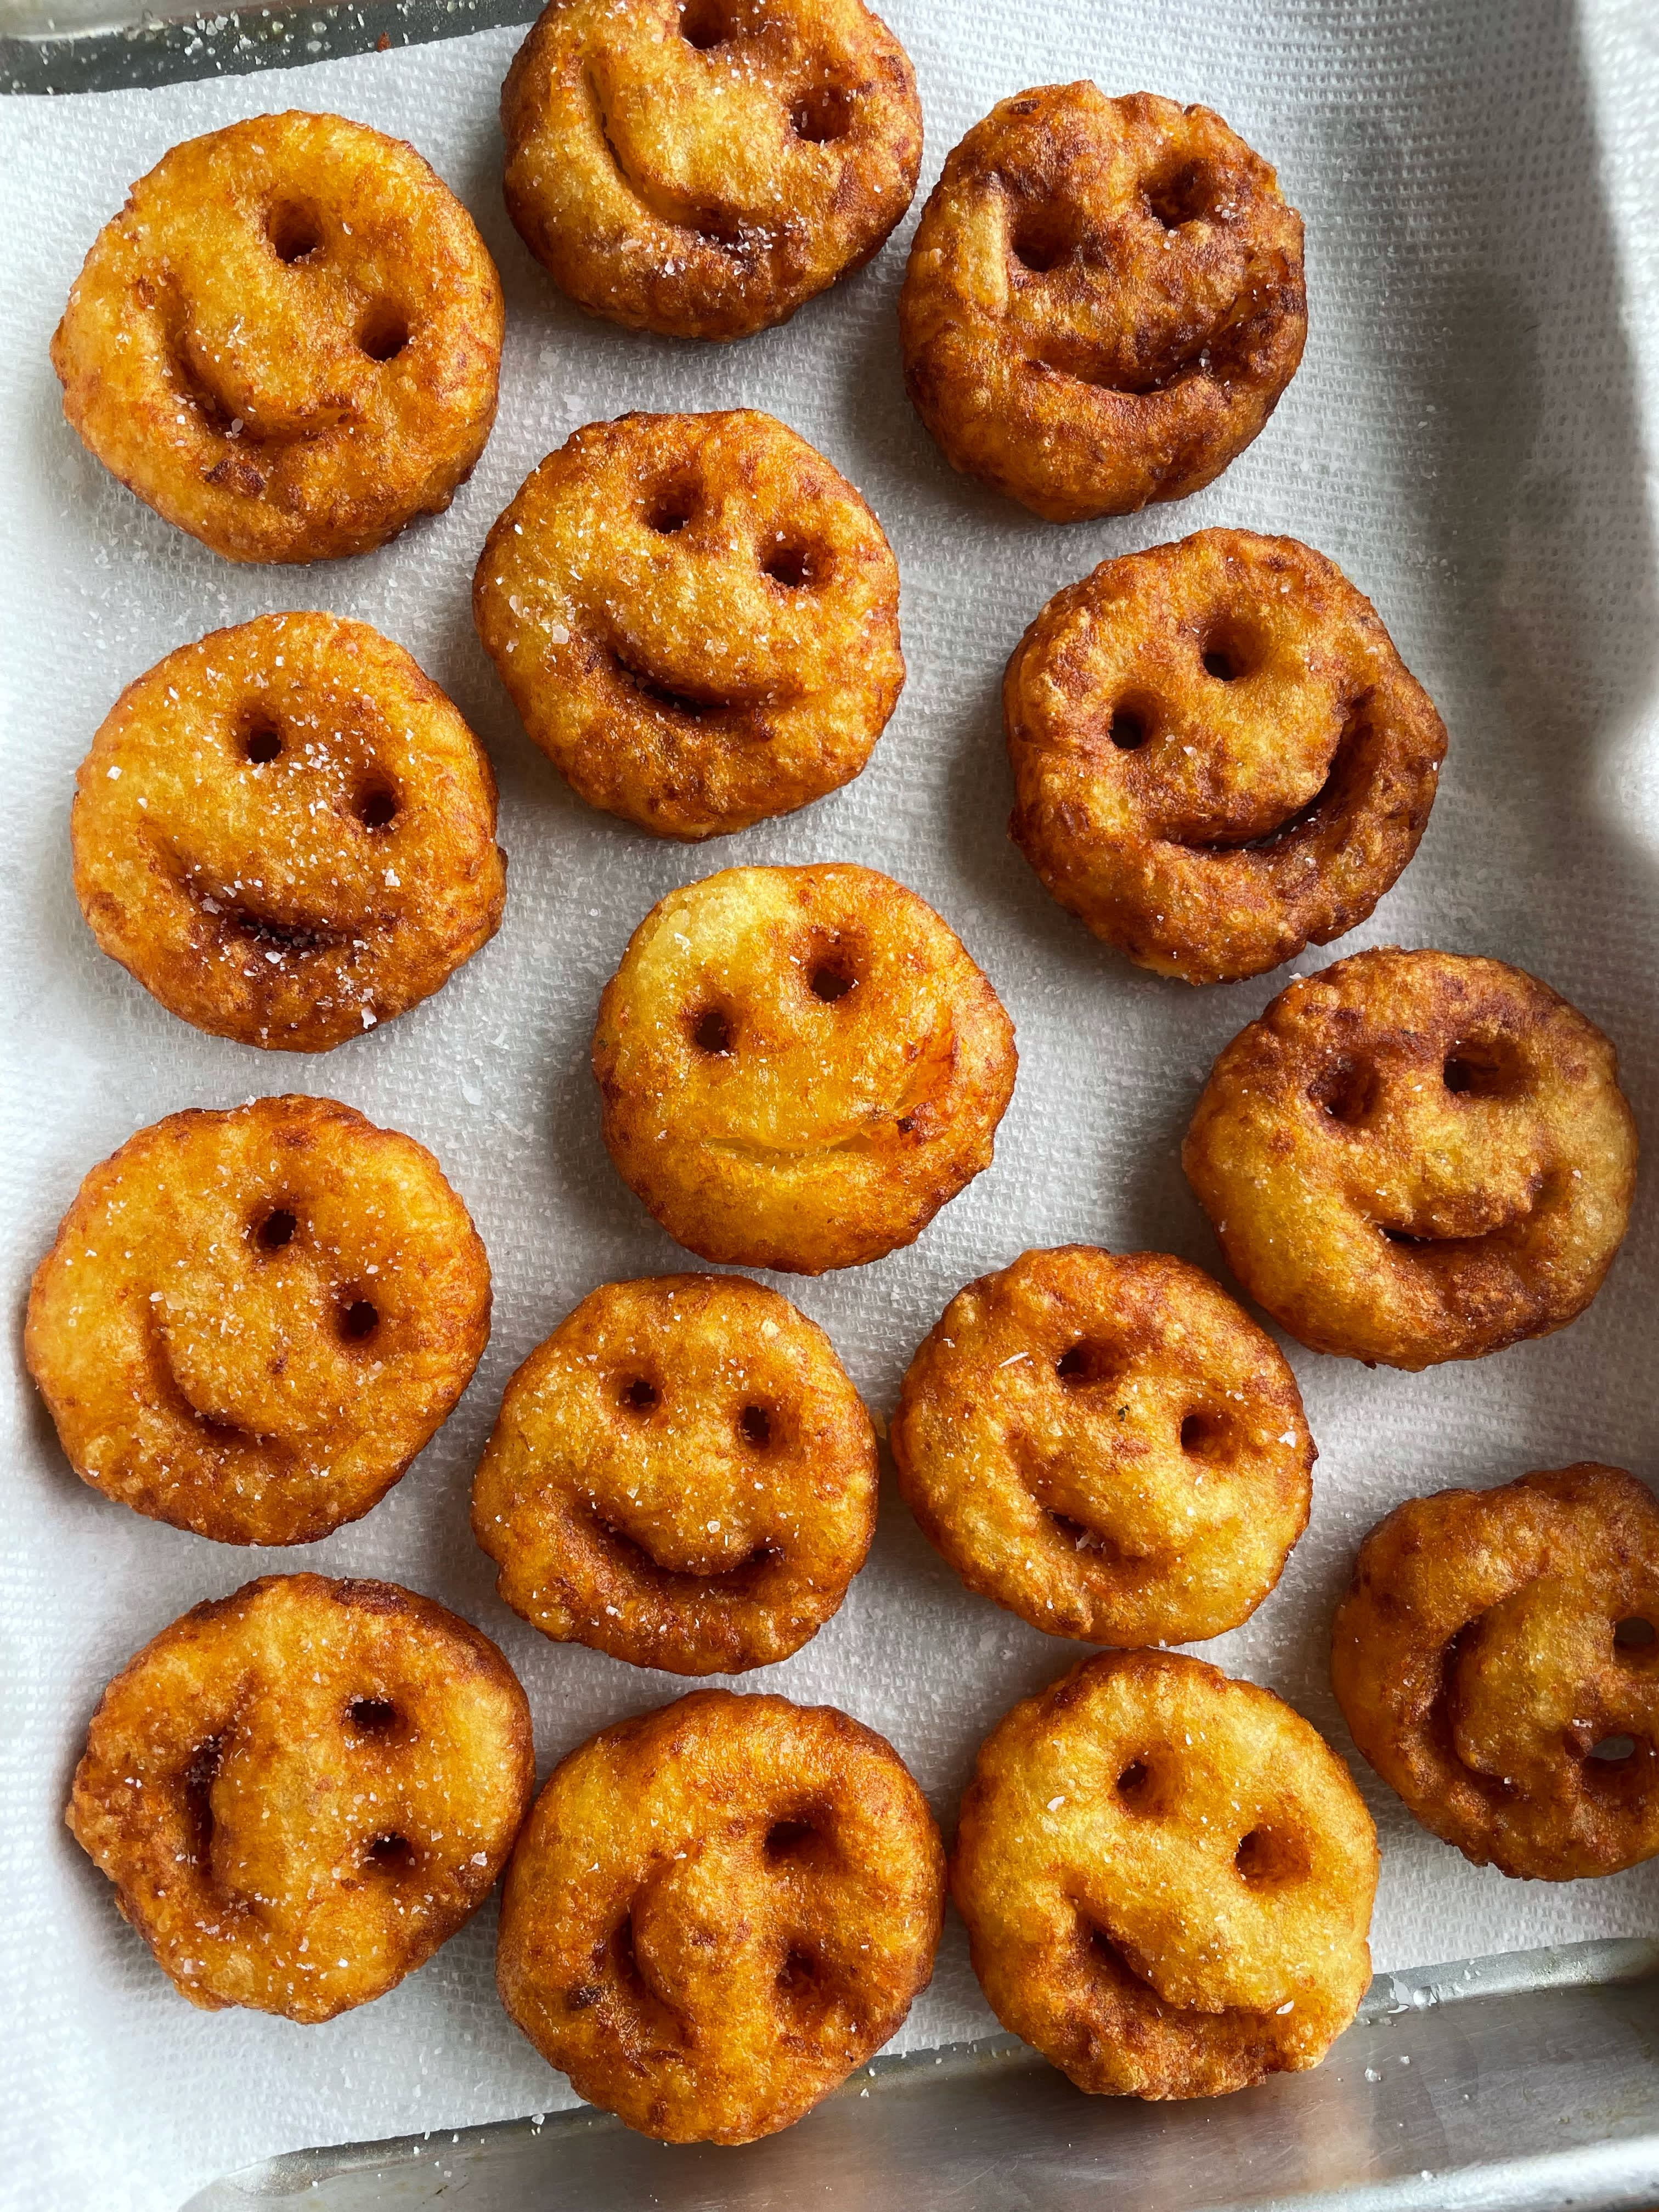 These Homemade Smiley Fries Are the Happiest Snack Around   Kitchn